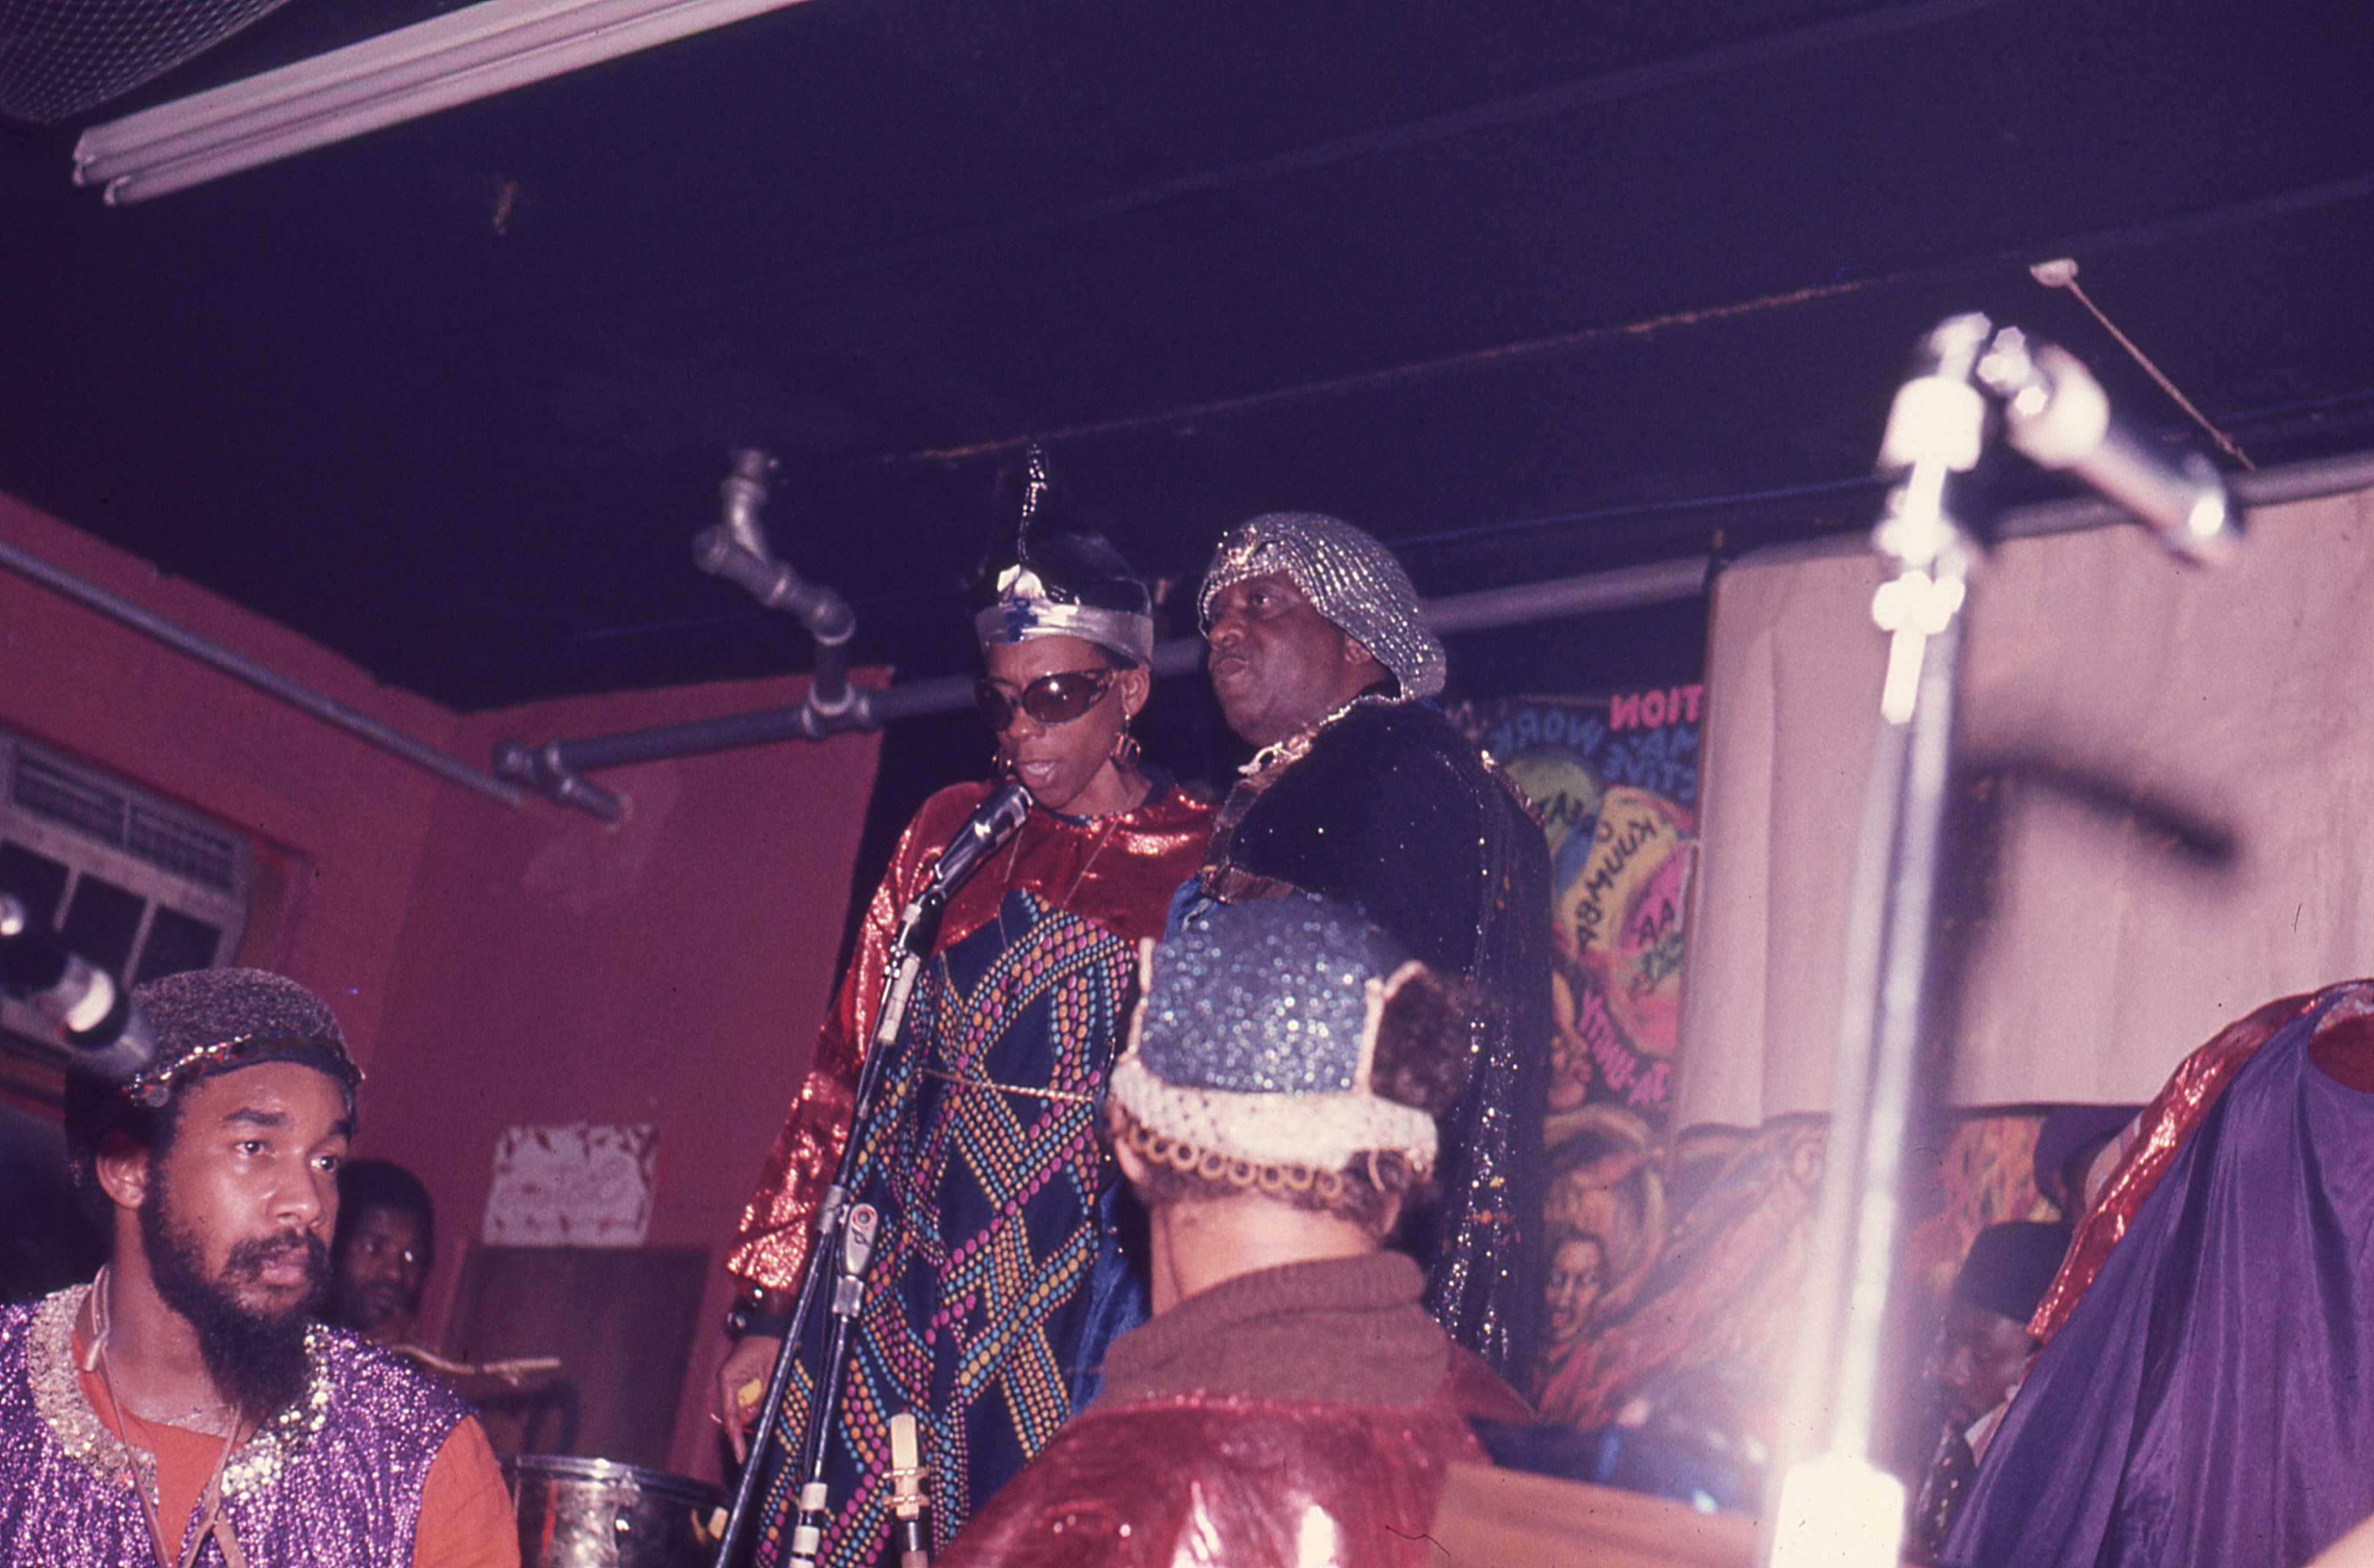 Sun Ra and June Tyson at The East, photographed by Basir Mchawi.